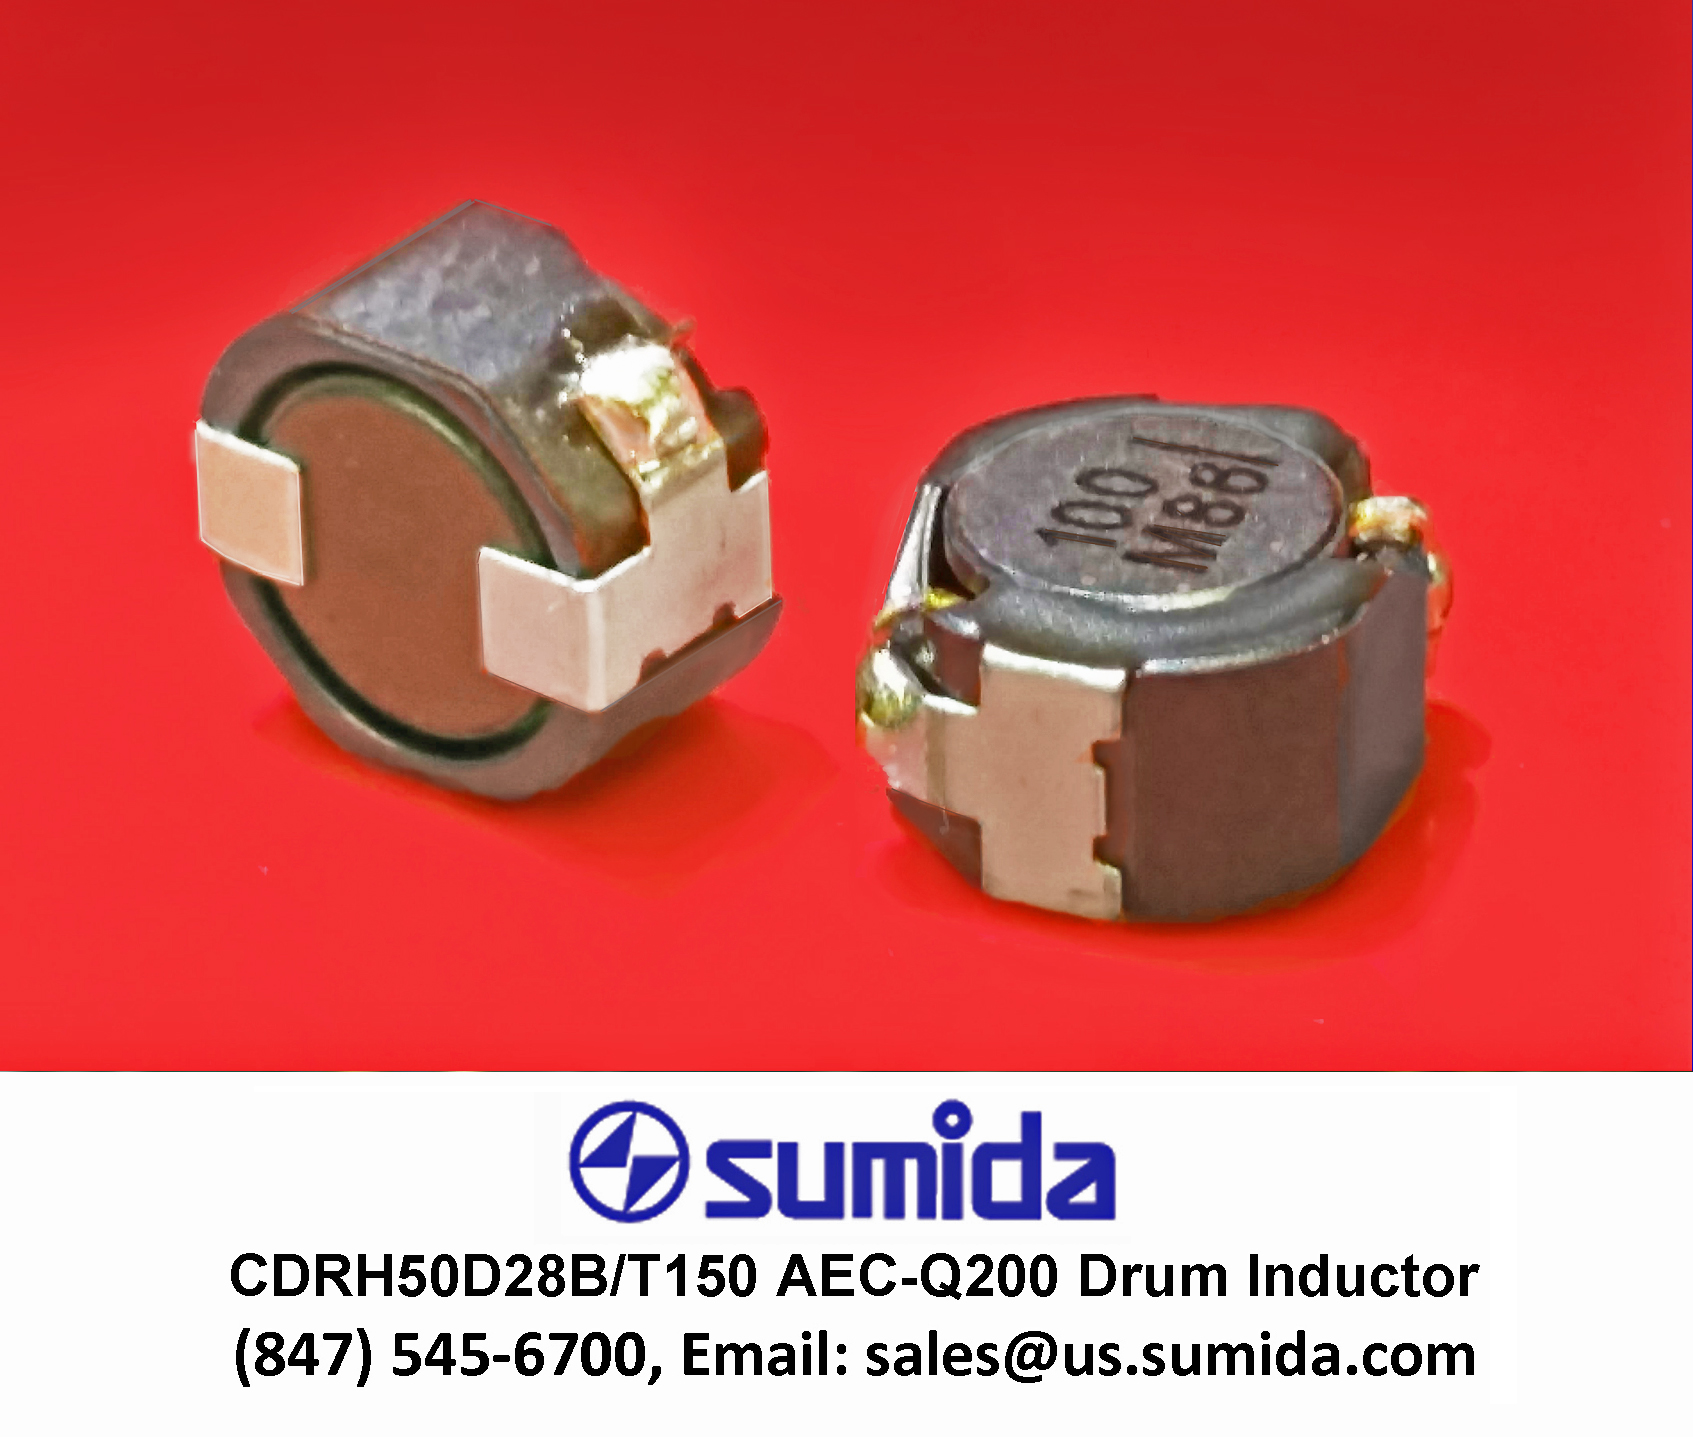 Shielded Drum Inductor Designed for Automotive Applications